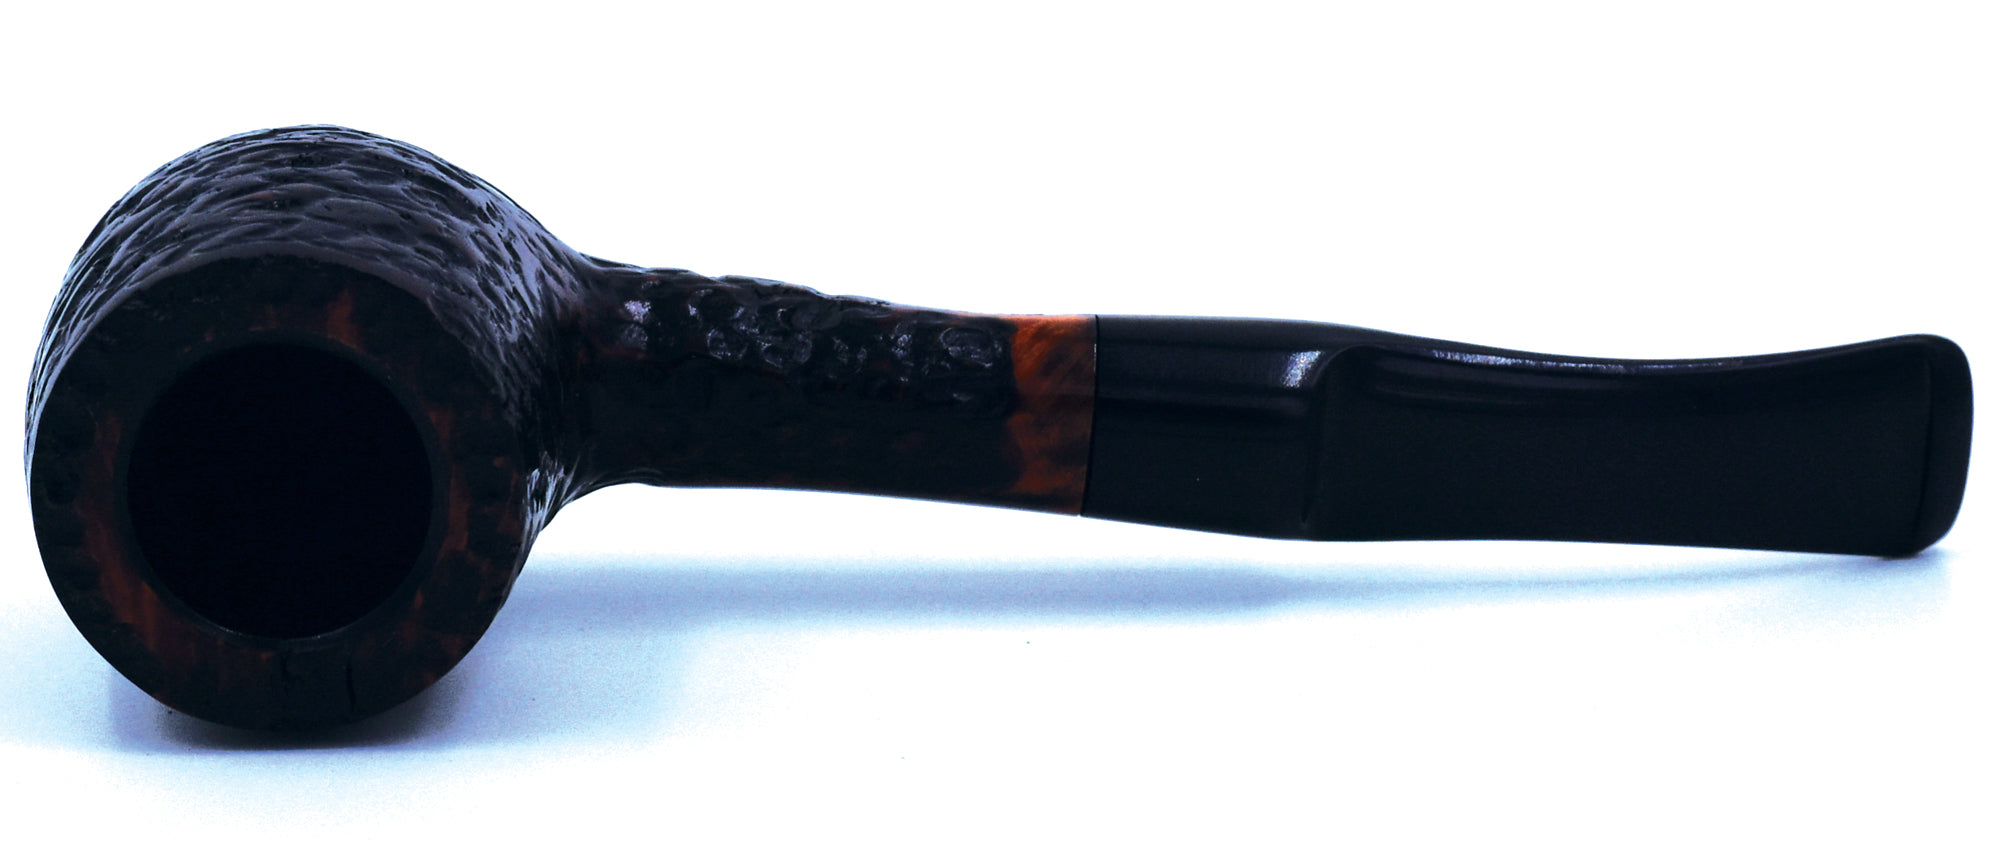 LEGENDEX® LASCALA* 9 MM Filtered Briar Smoking Pipe Made In Italy 01-08-510 Acrylic Series